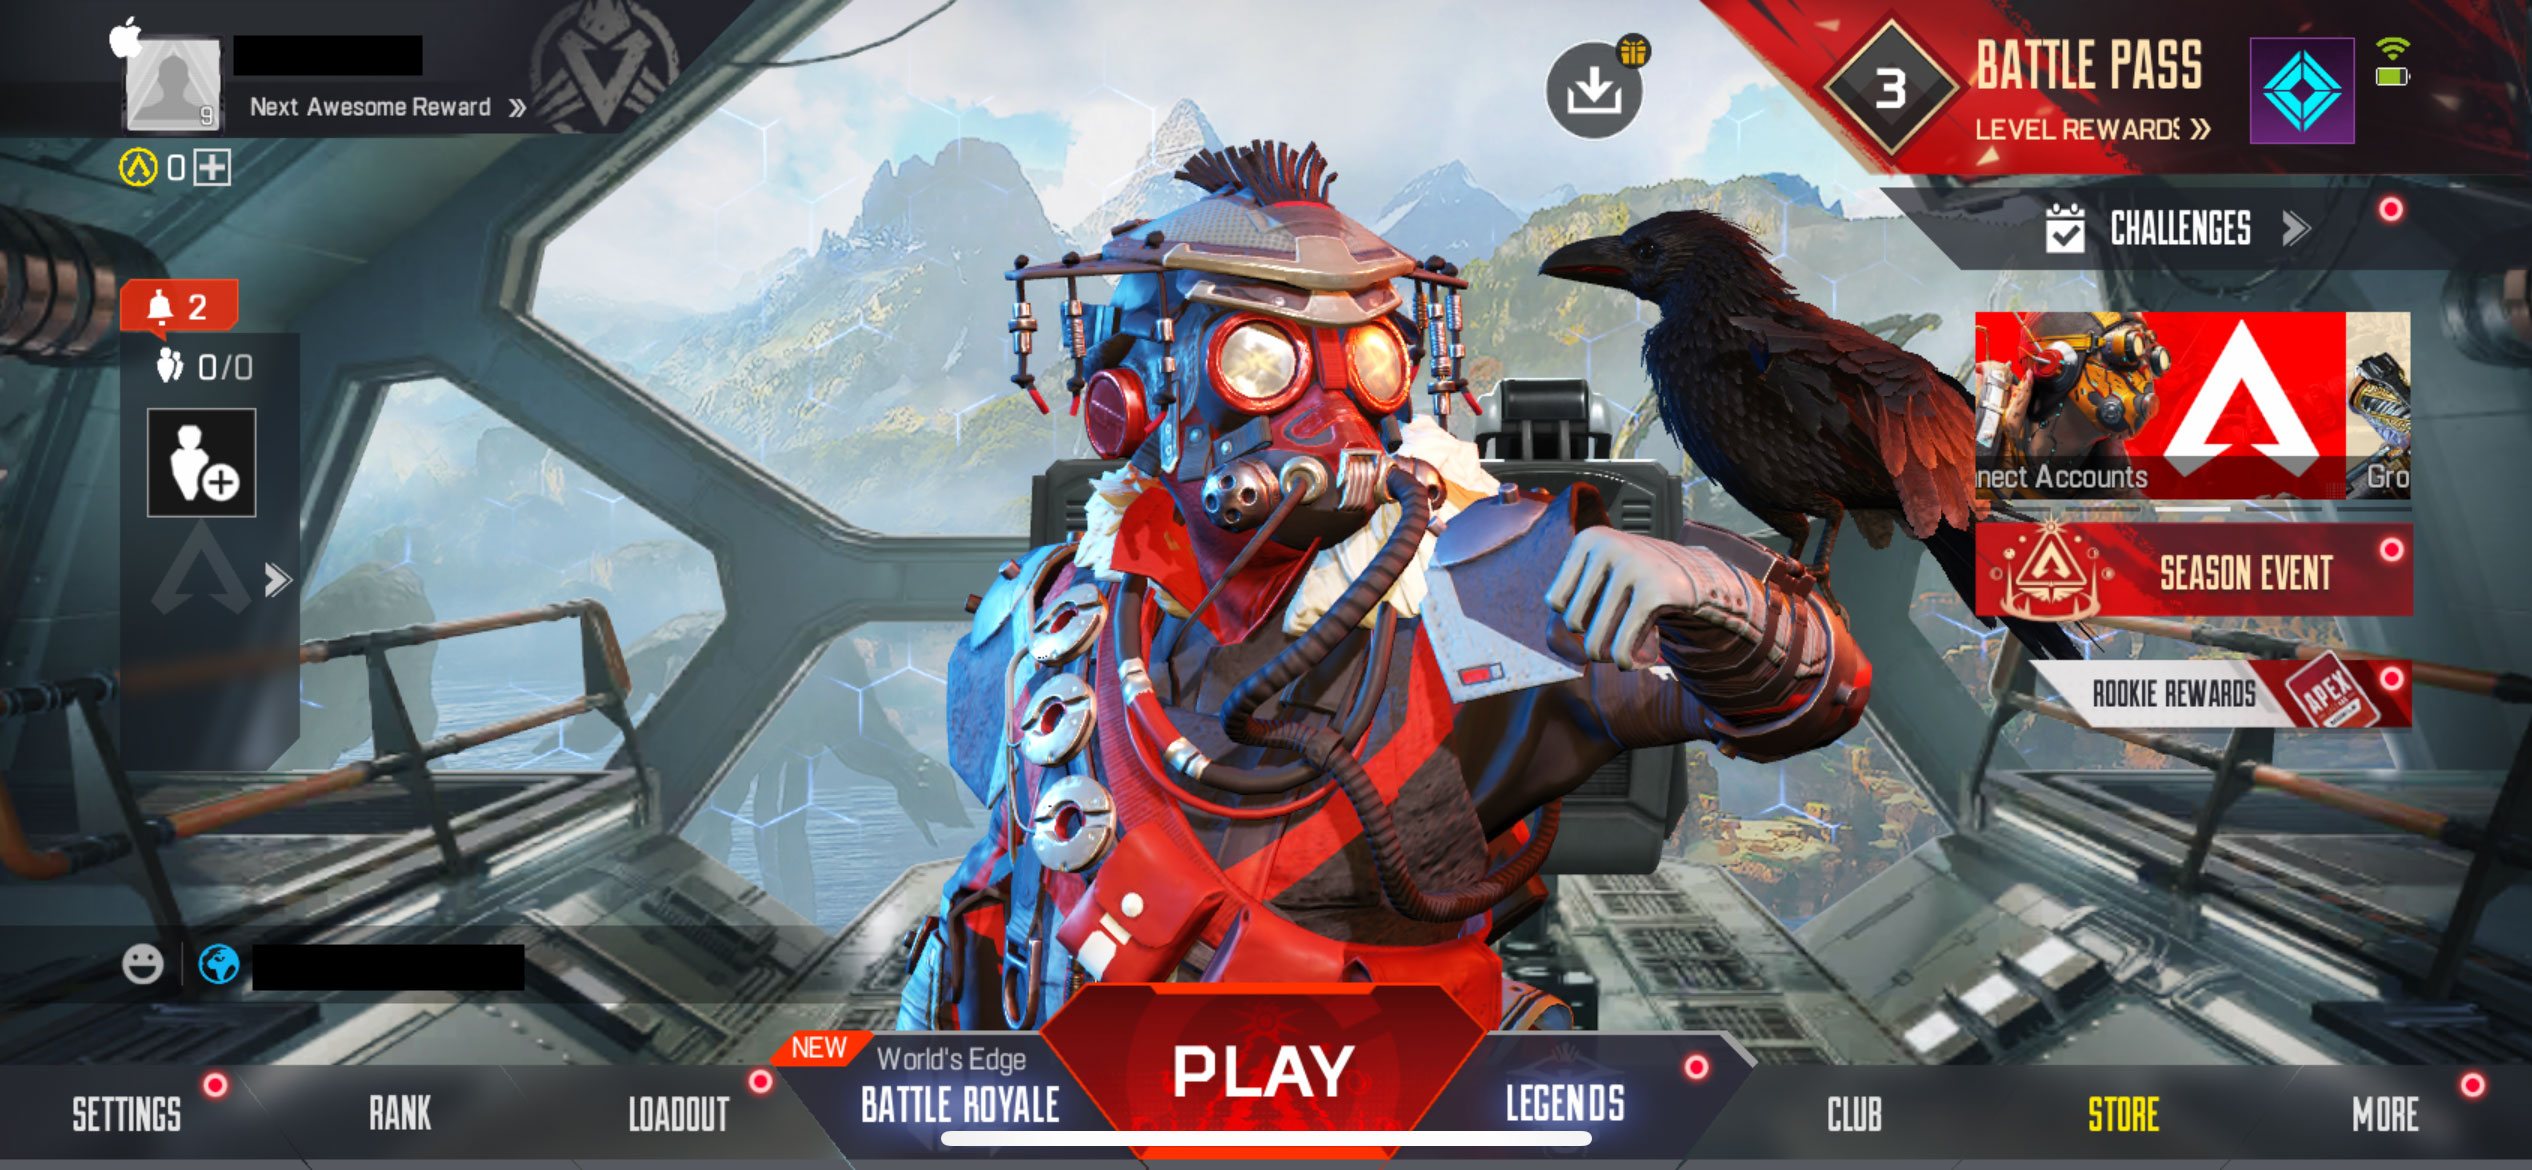 High Energy Heroes to Replace Discontinued Apex Legends Mobile - TRN  Checkpoint